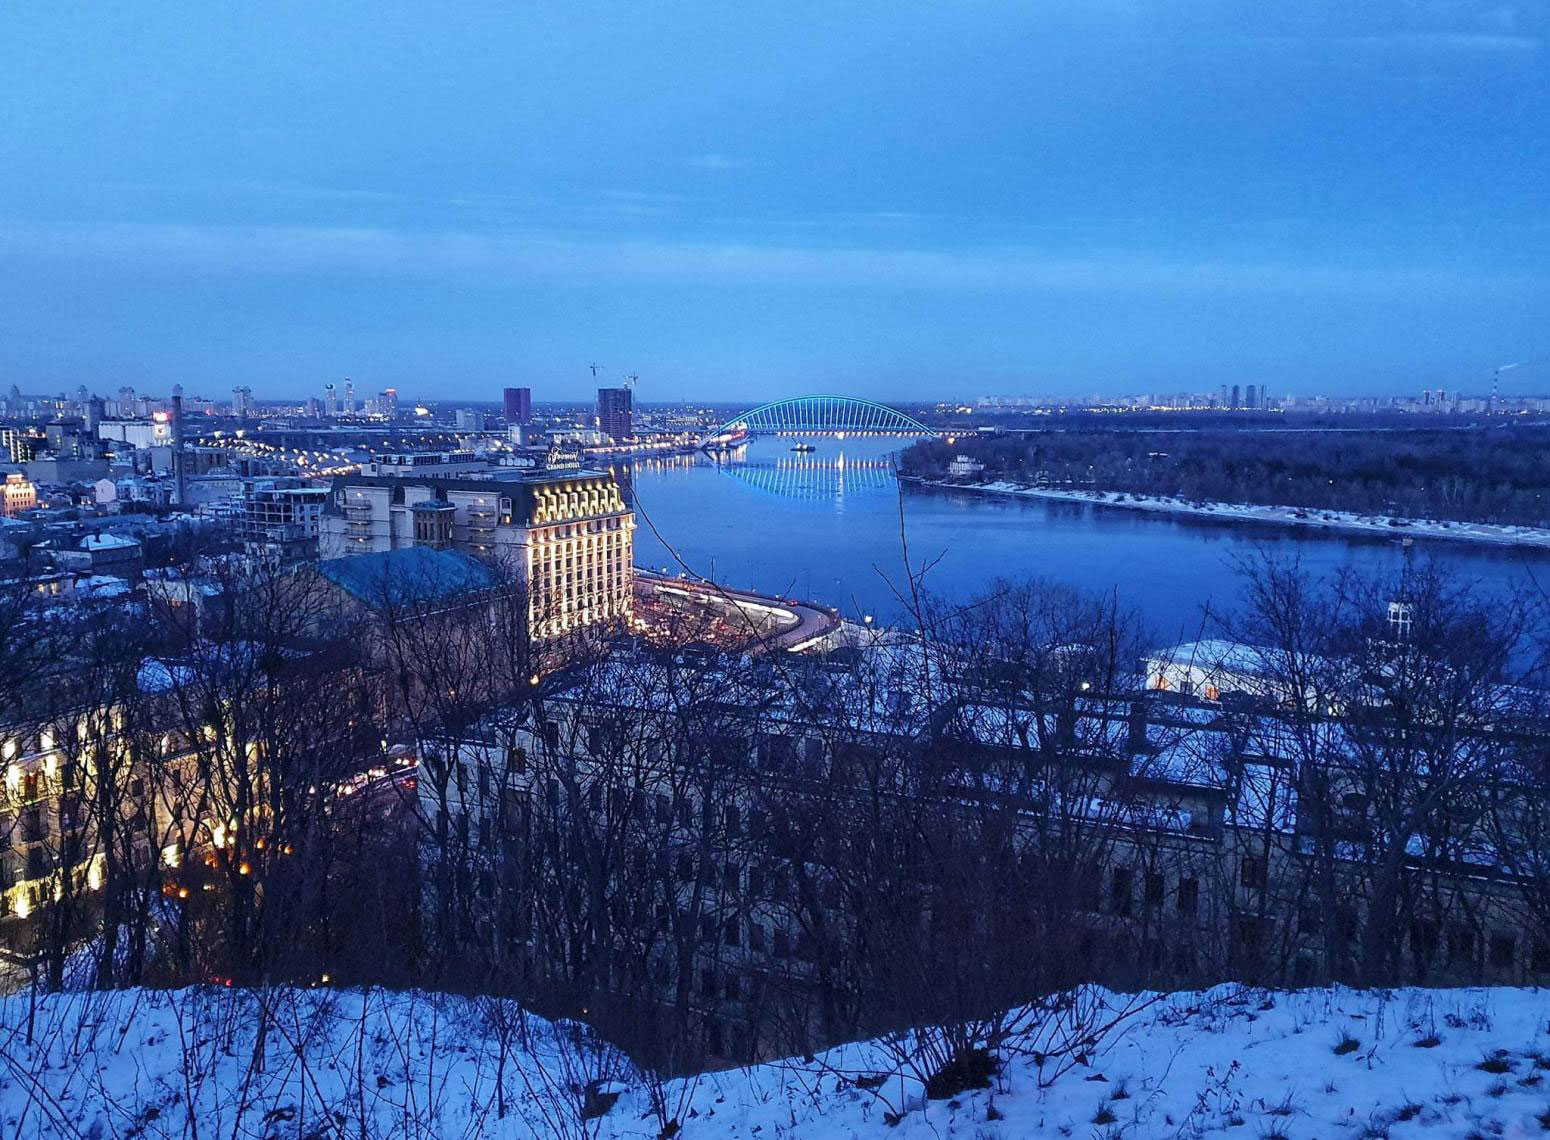 PHOTO: Image depicts the city of Kyiv in the evening. Photo by Lindsey Murff.